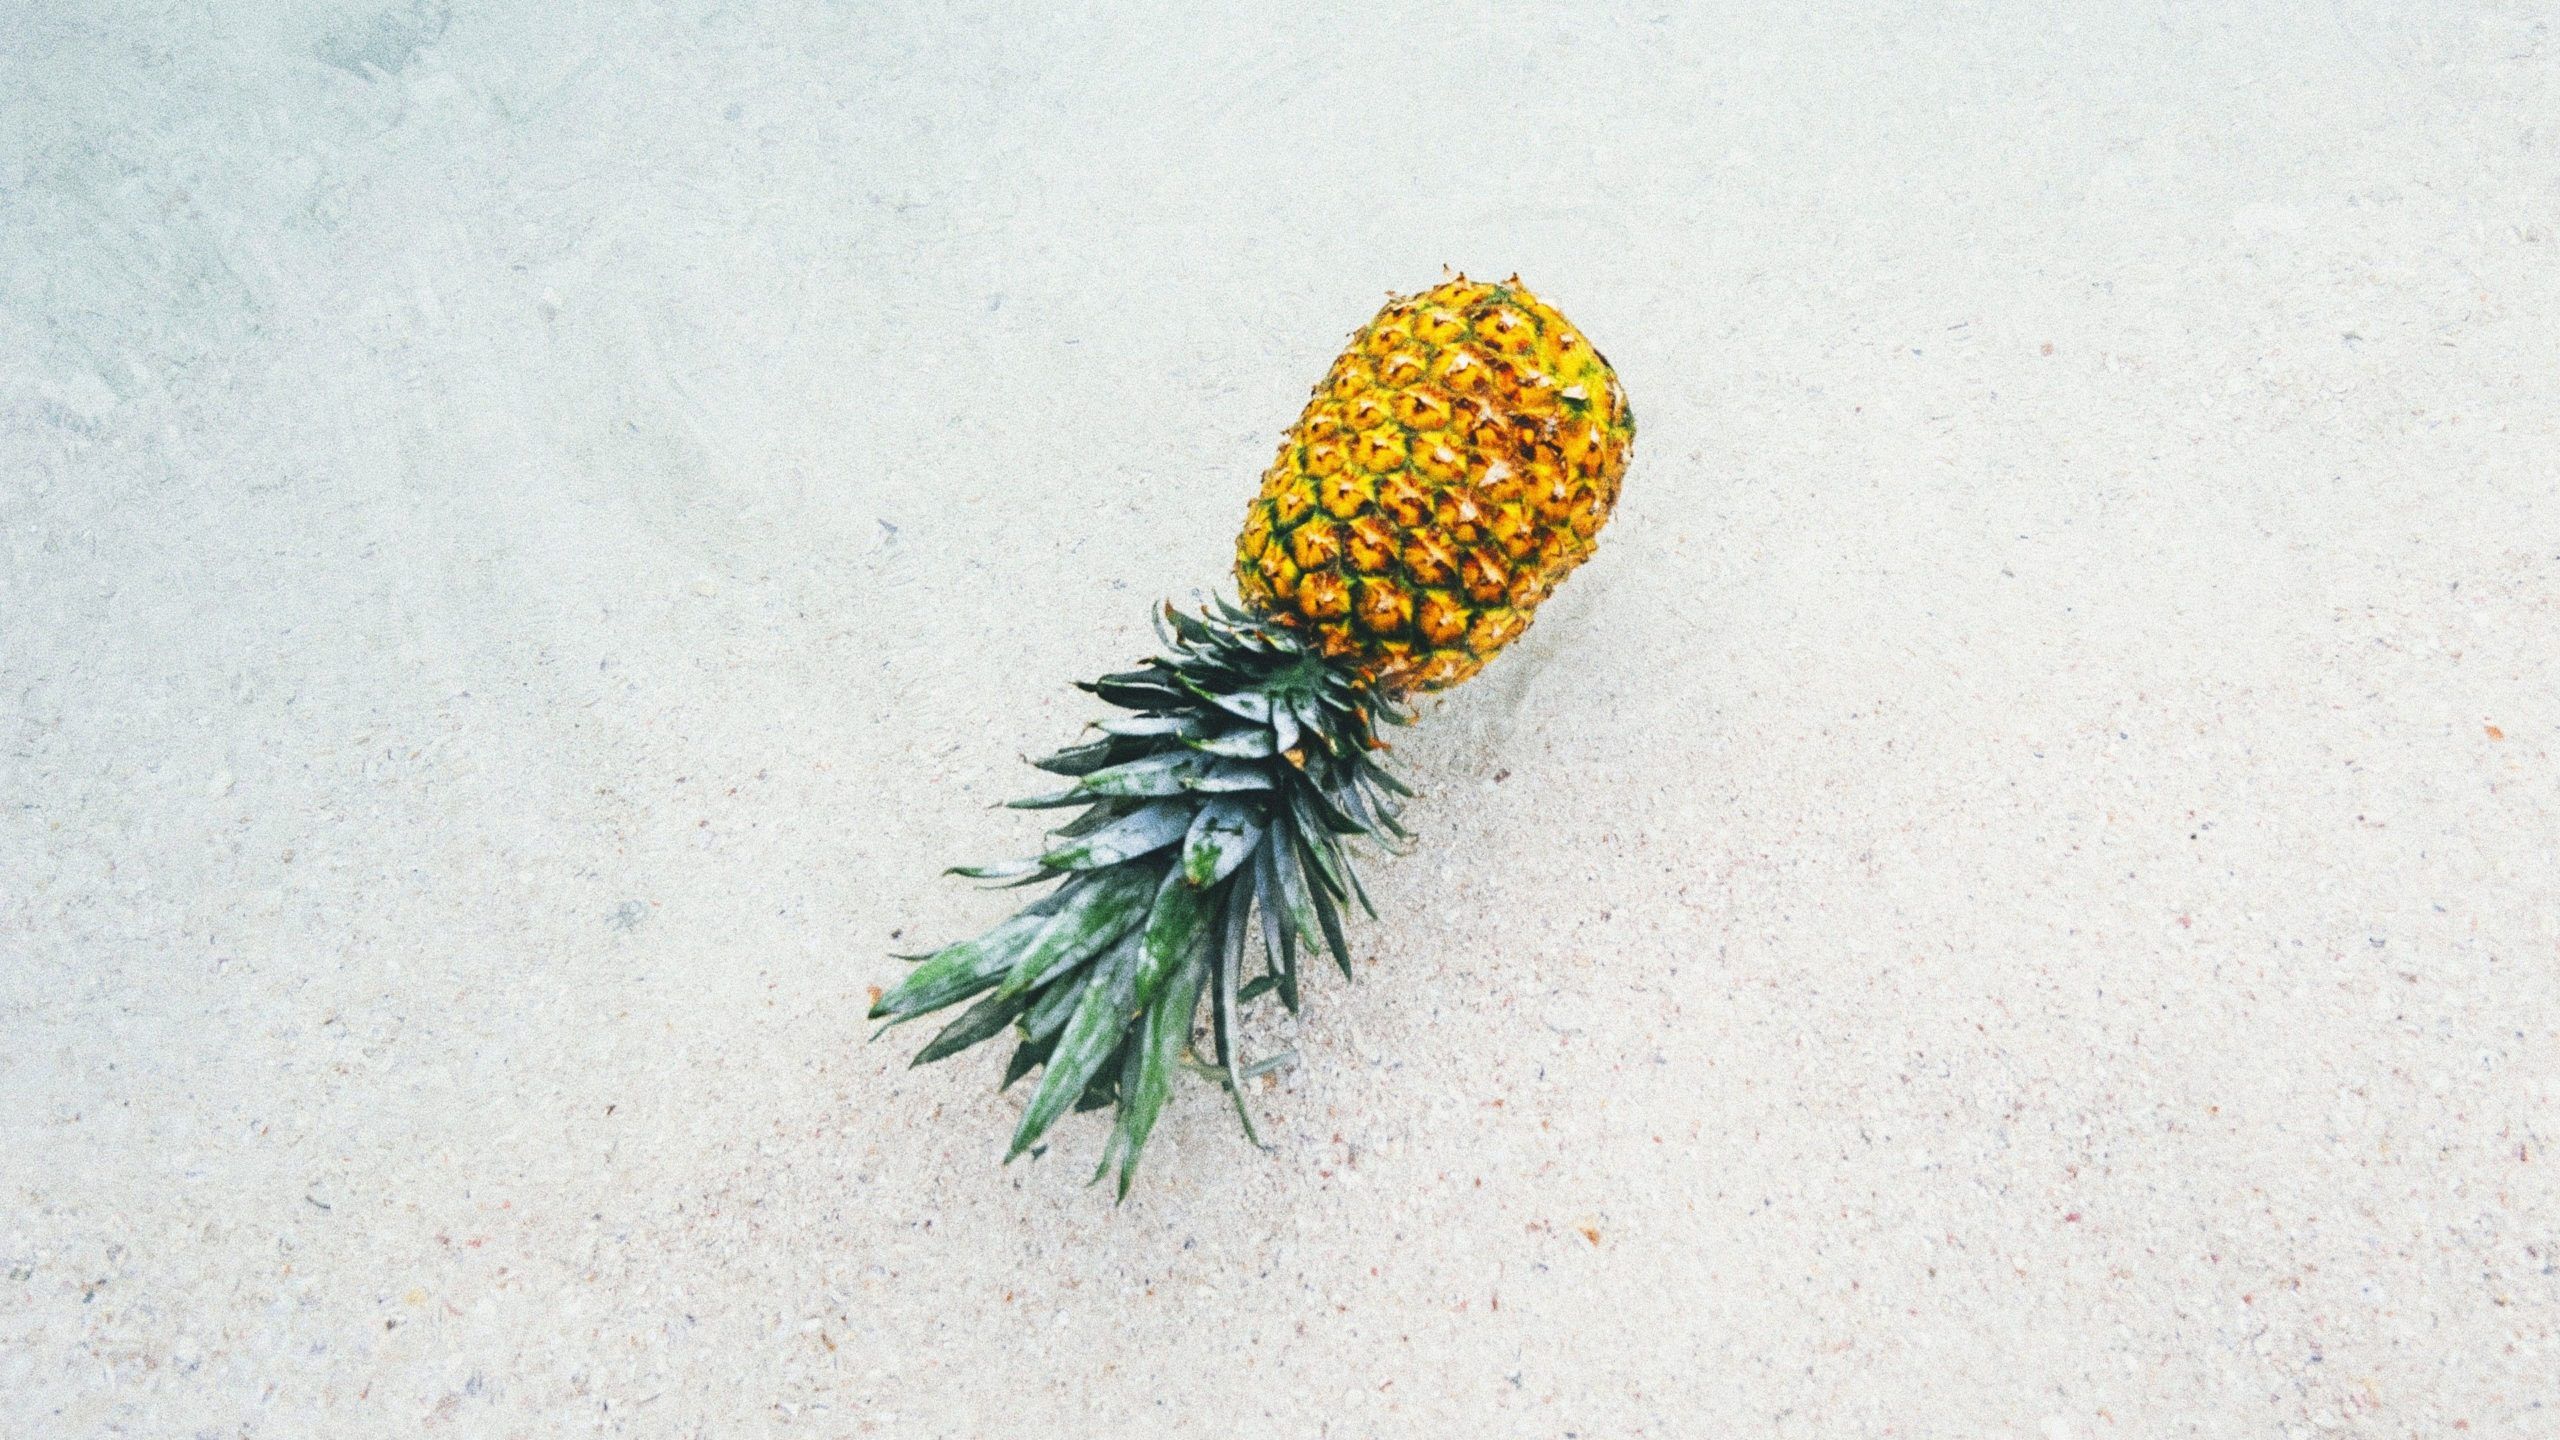 A pineapple on the sand - Pineapple